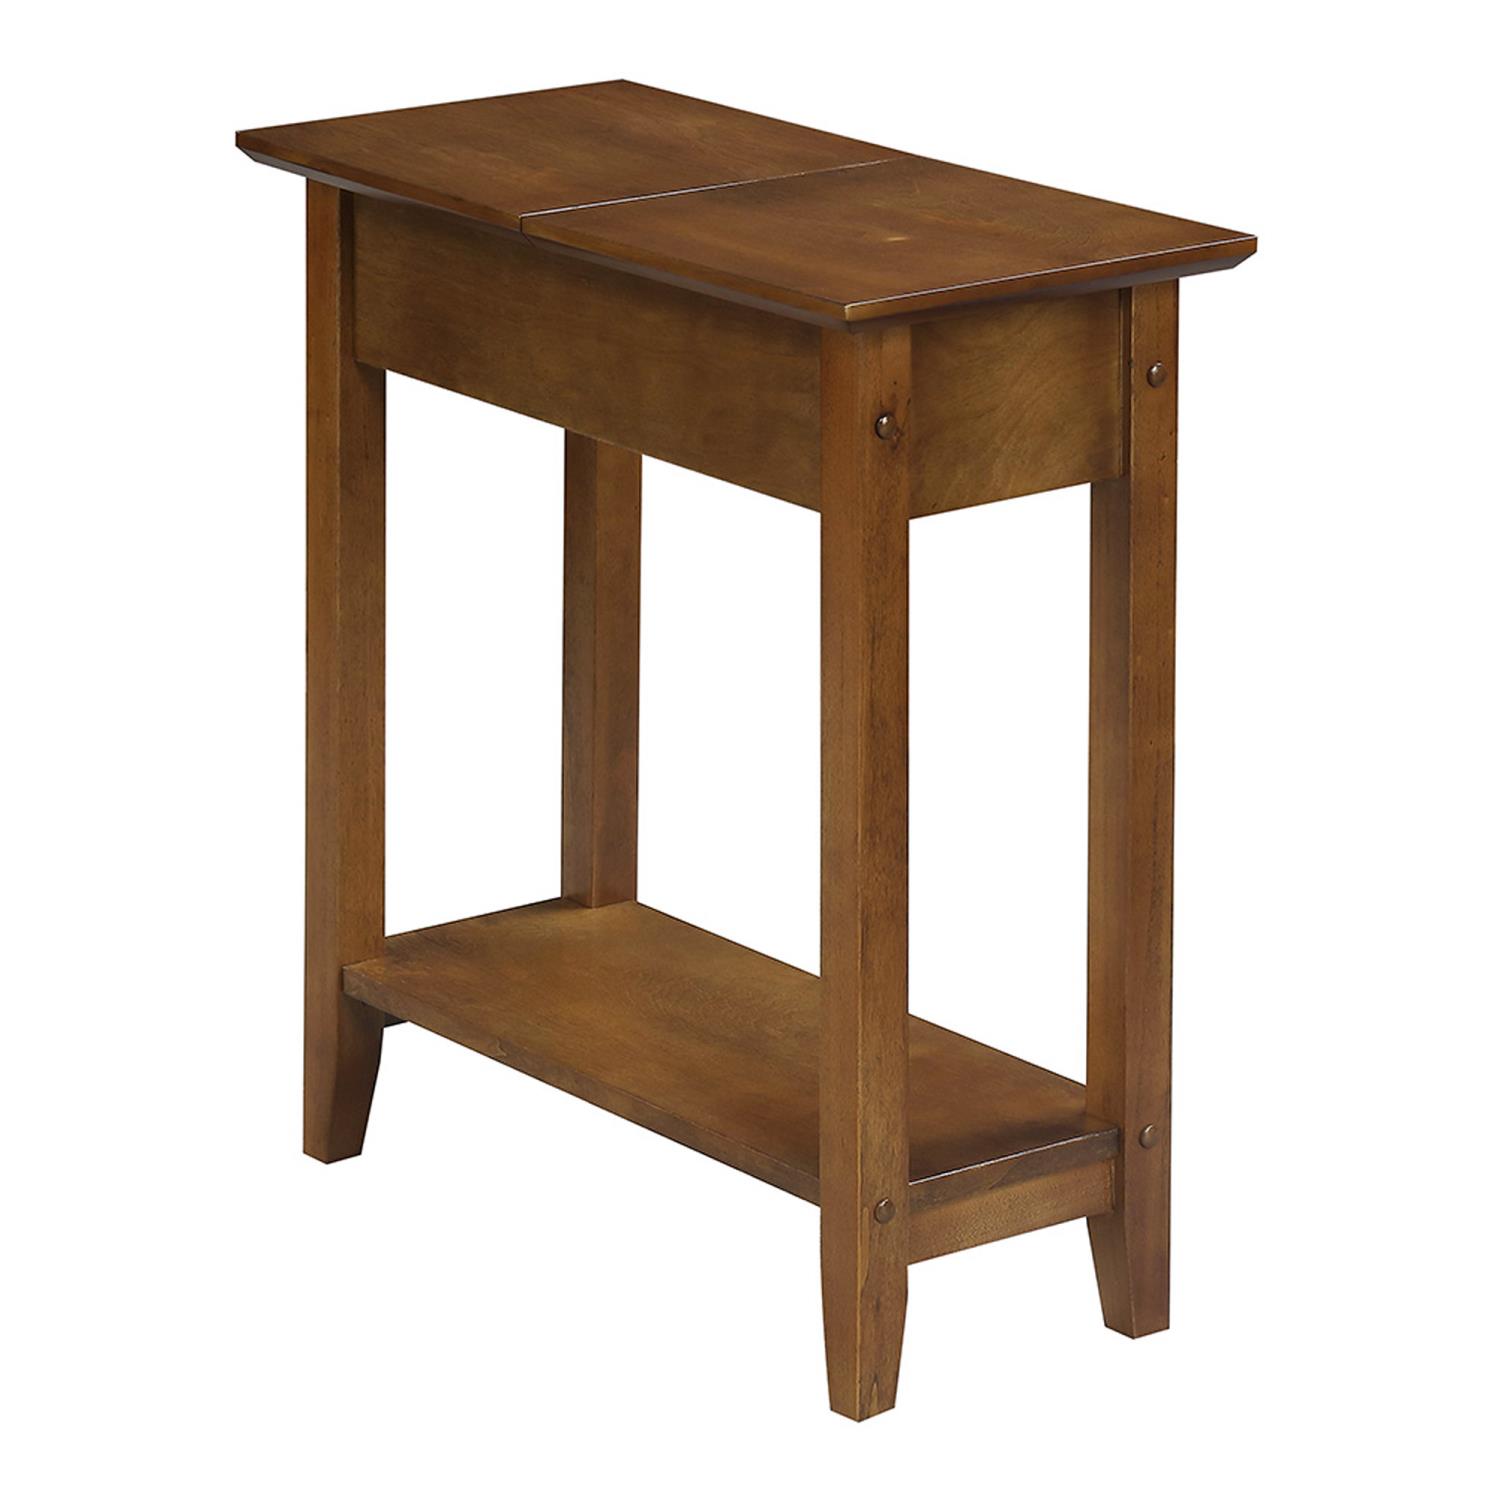 Convenience Concepts American Heritage Flip Top End Table With Shelf R6-261